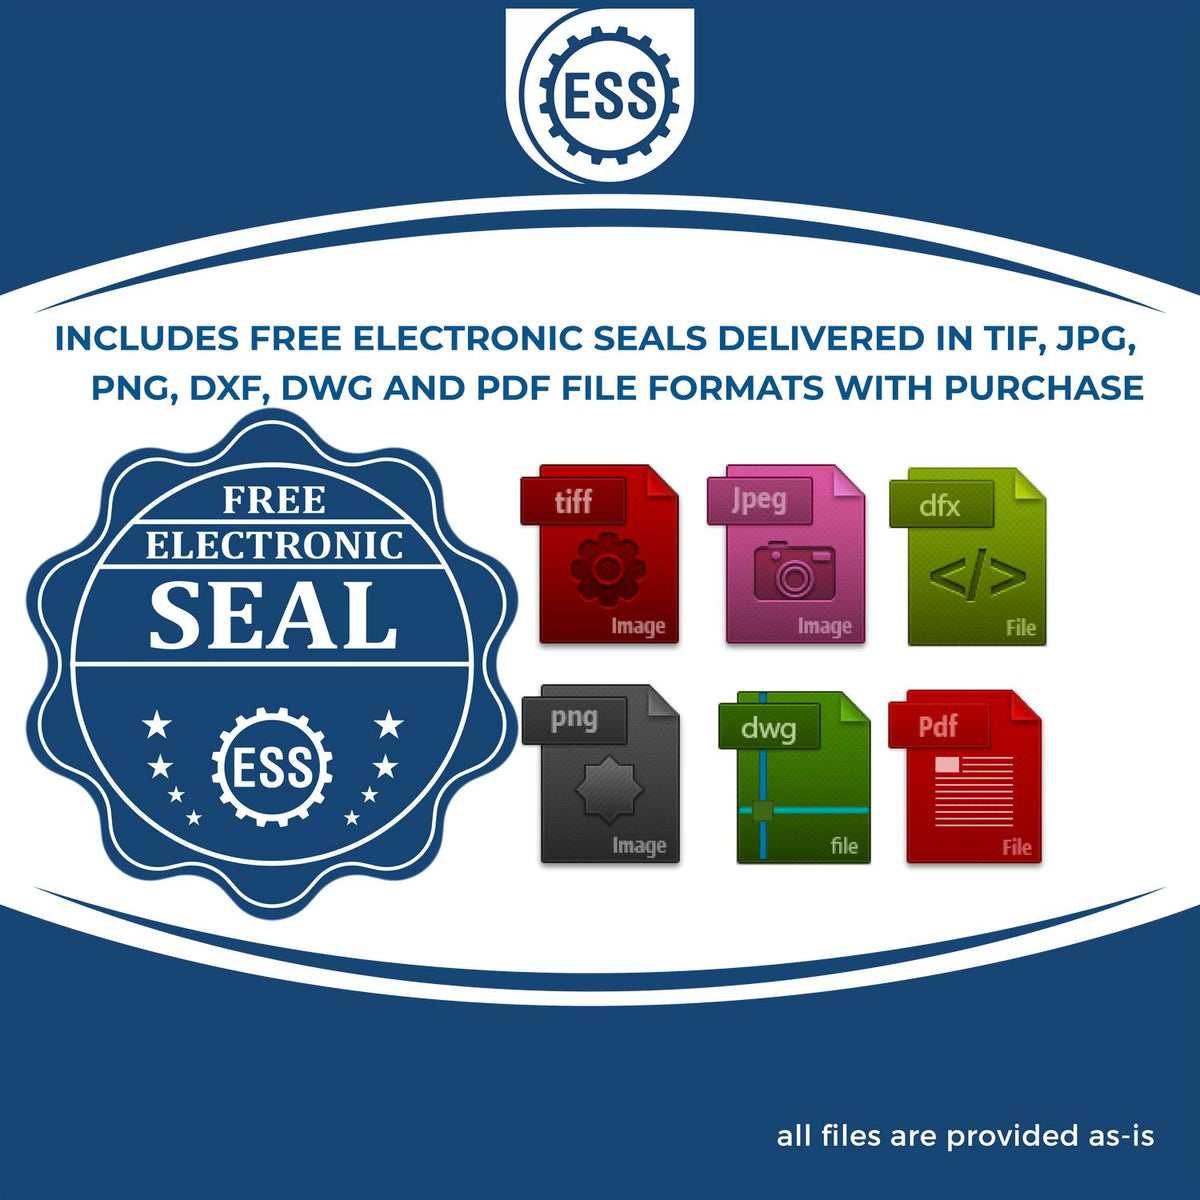 An infographic for the free electronic seal for the Gift New Mexico Landscape Architect Seal illustrating the different file type icons such as DXF, DWG, TIF, JPG and PNG.